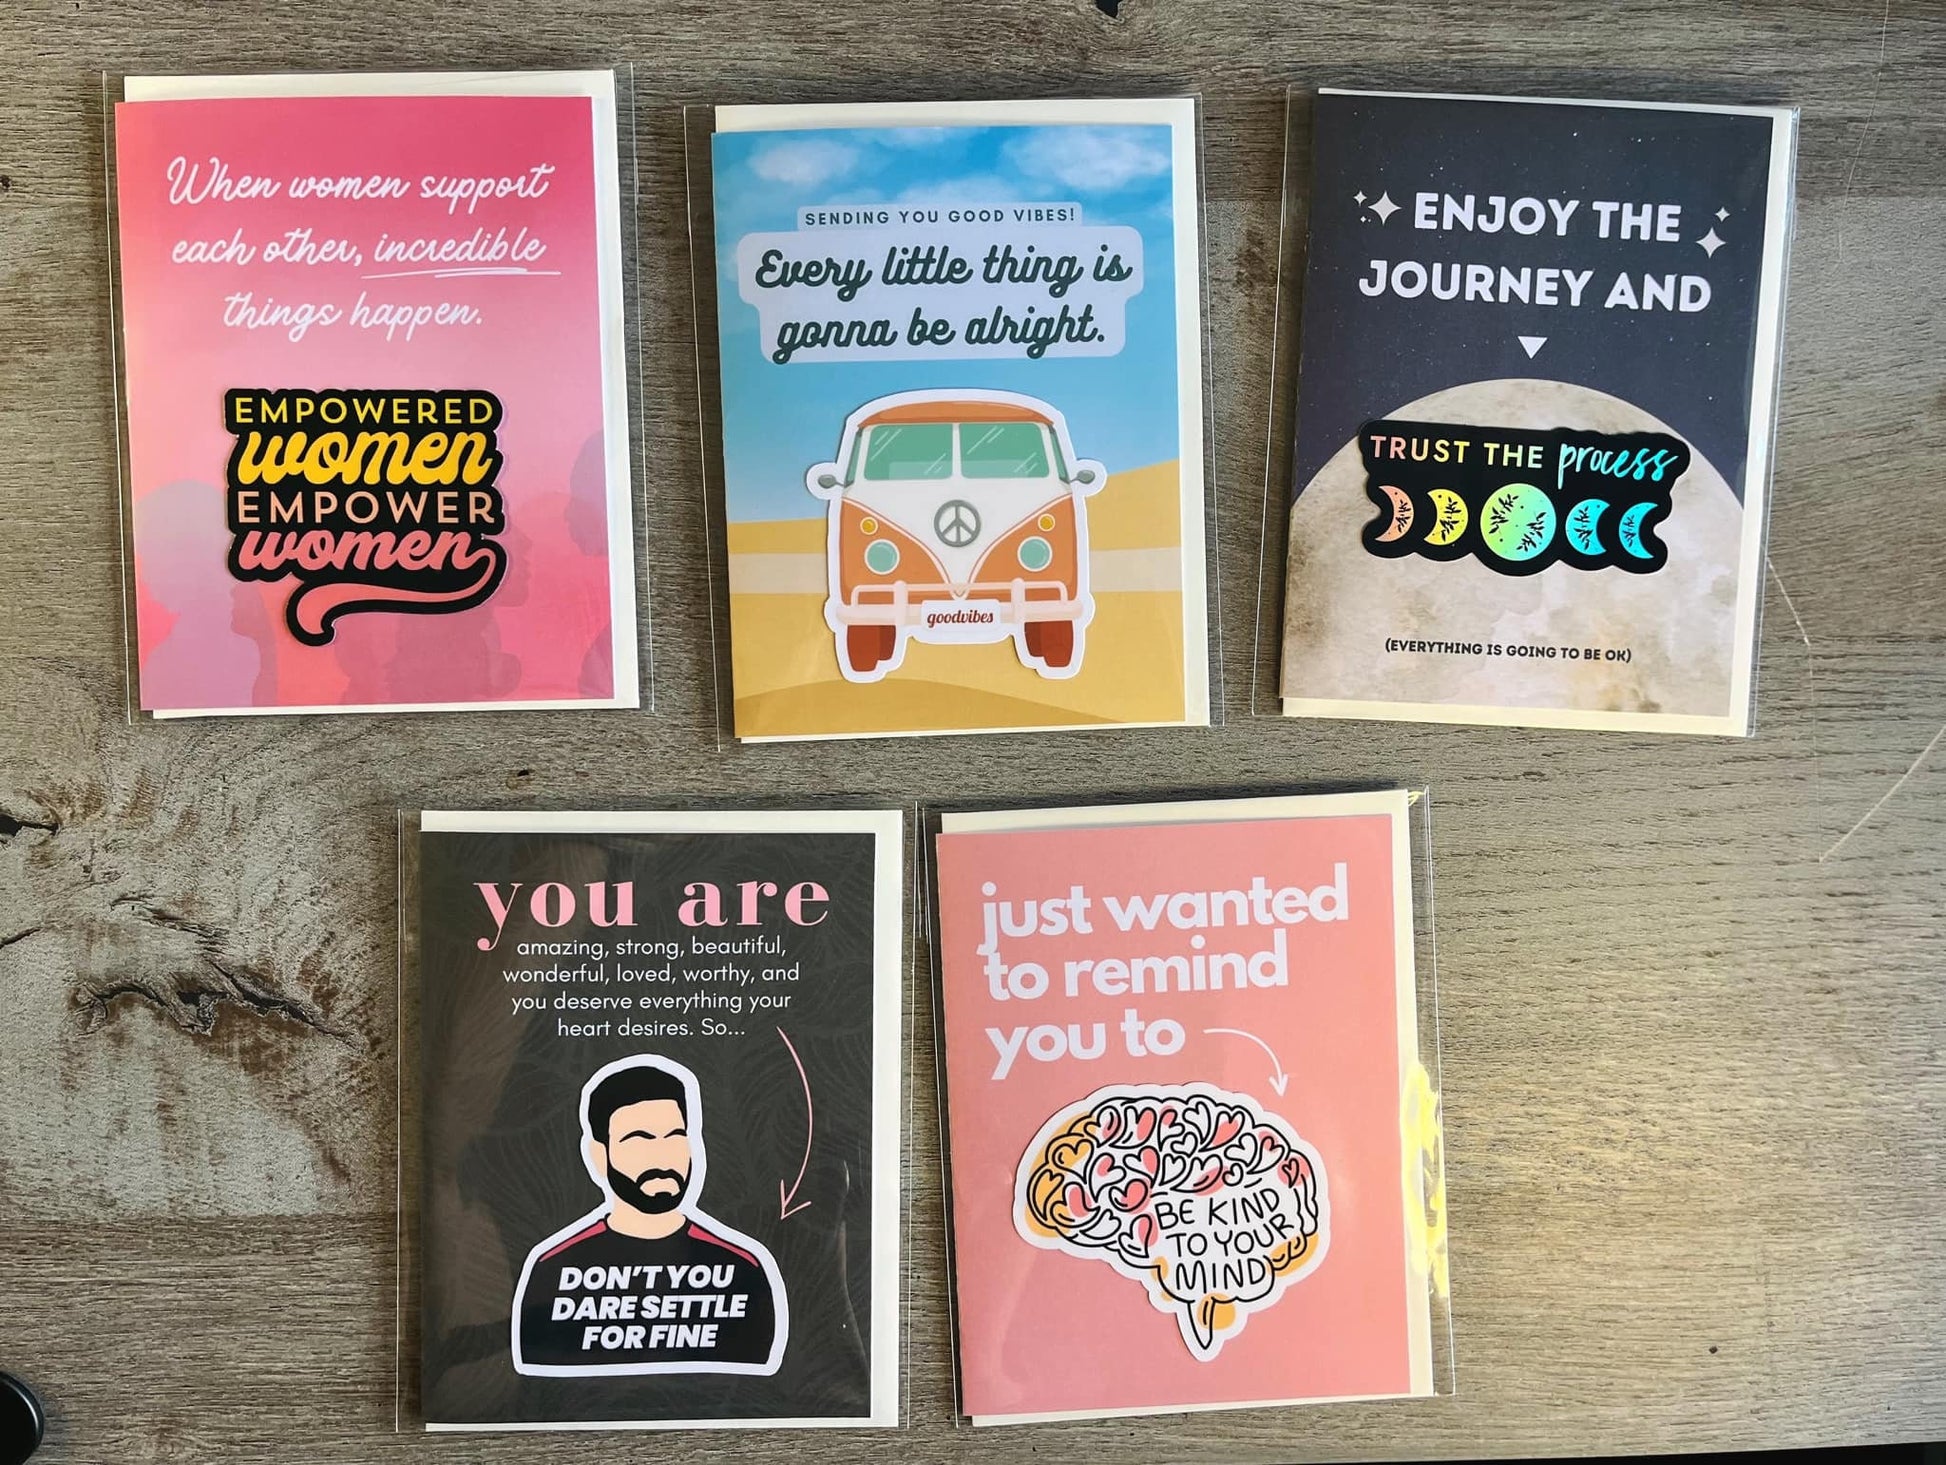 NEW! Every Little Thing is Gonna Be Alright Greeting Card | Sending You Good Vibes Sticker | Encouragement Gifts | Positive Cards